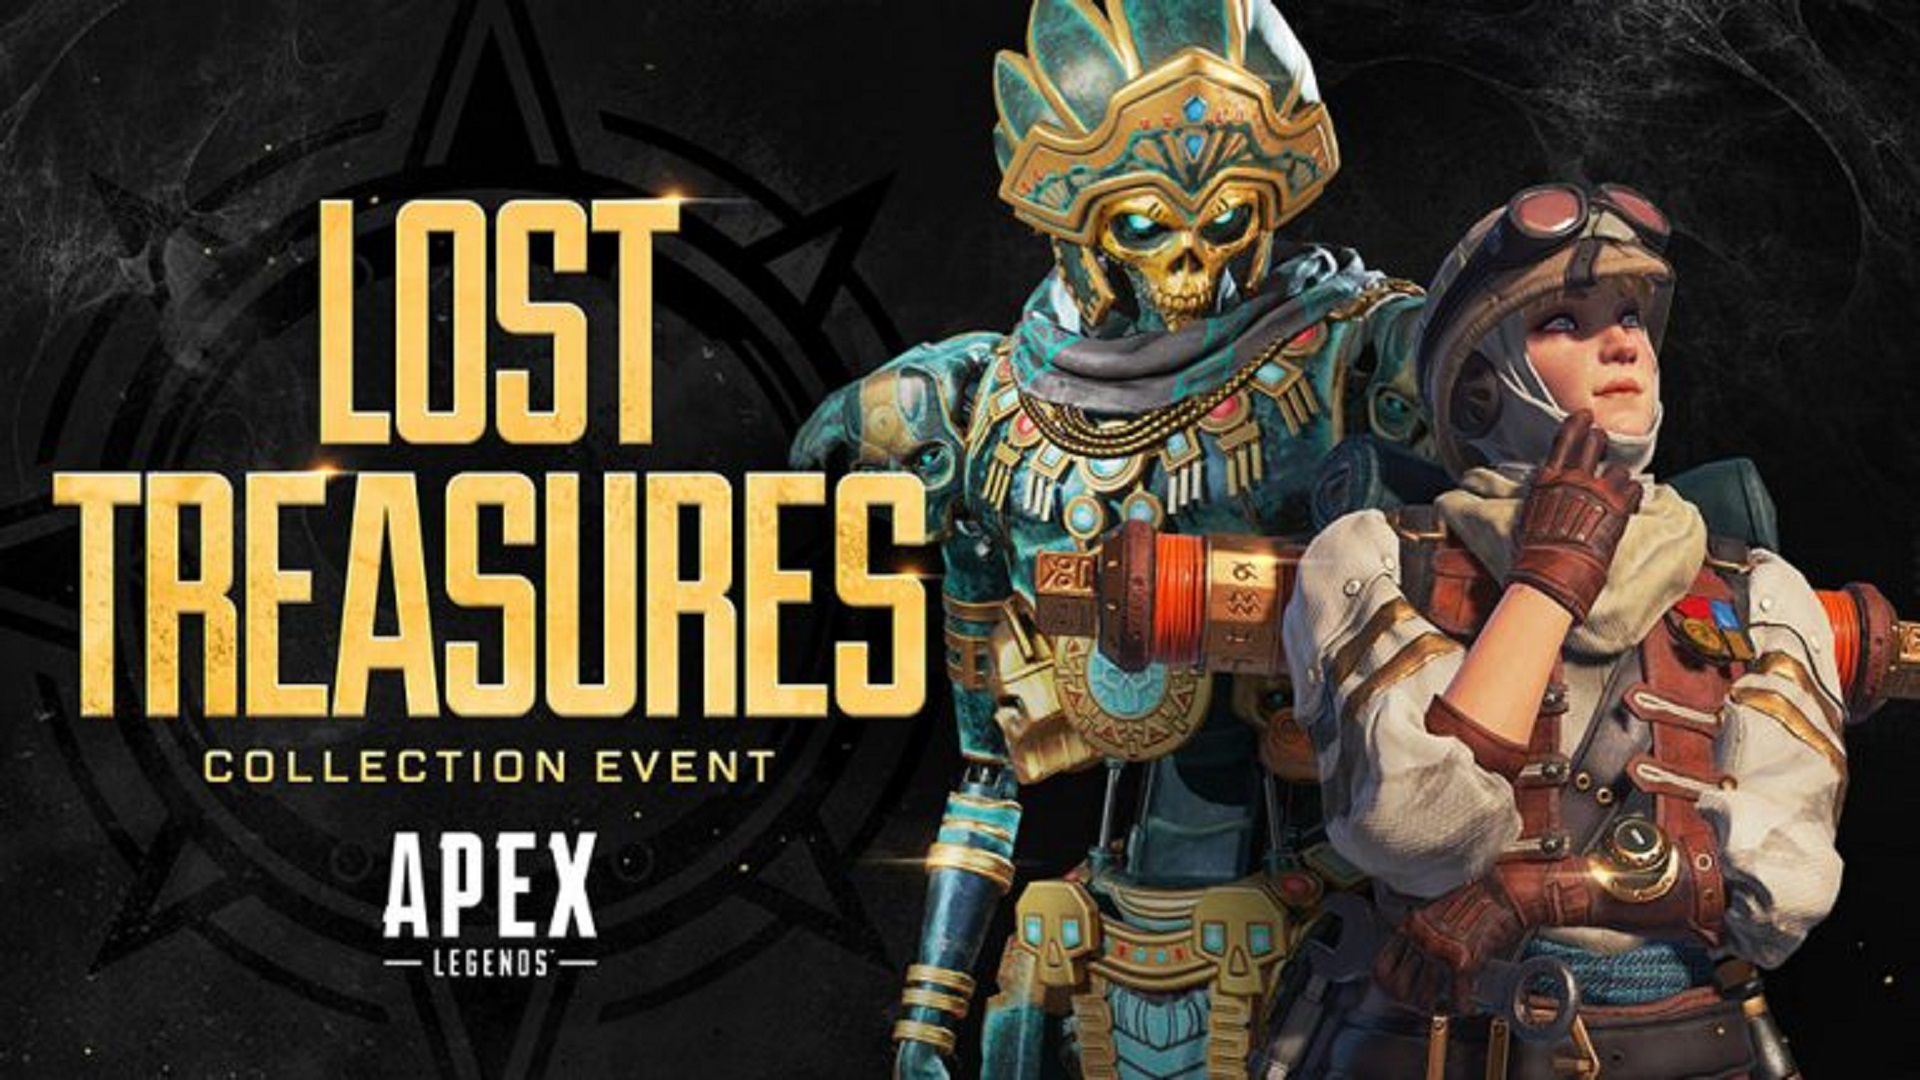 Apex Legends Lost Treasures Collection Event Is Now Live on PS4 With 1.40 Patch Notes